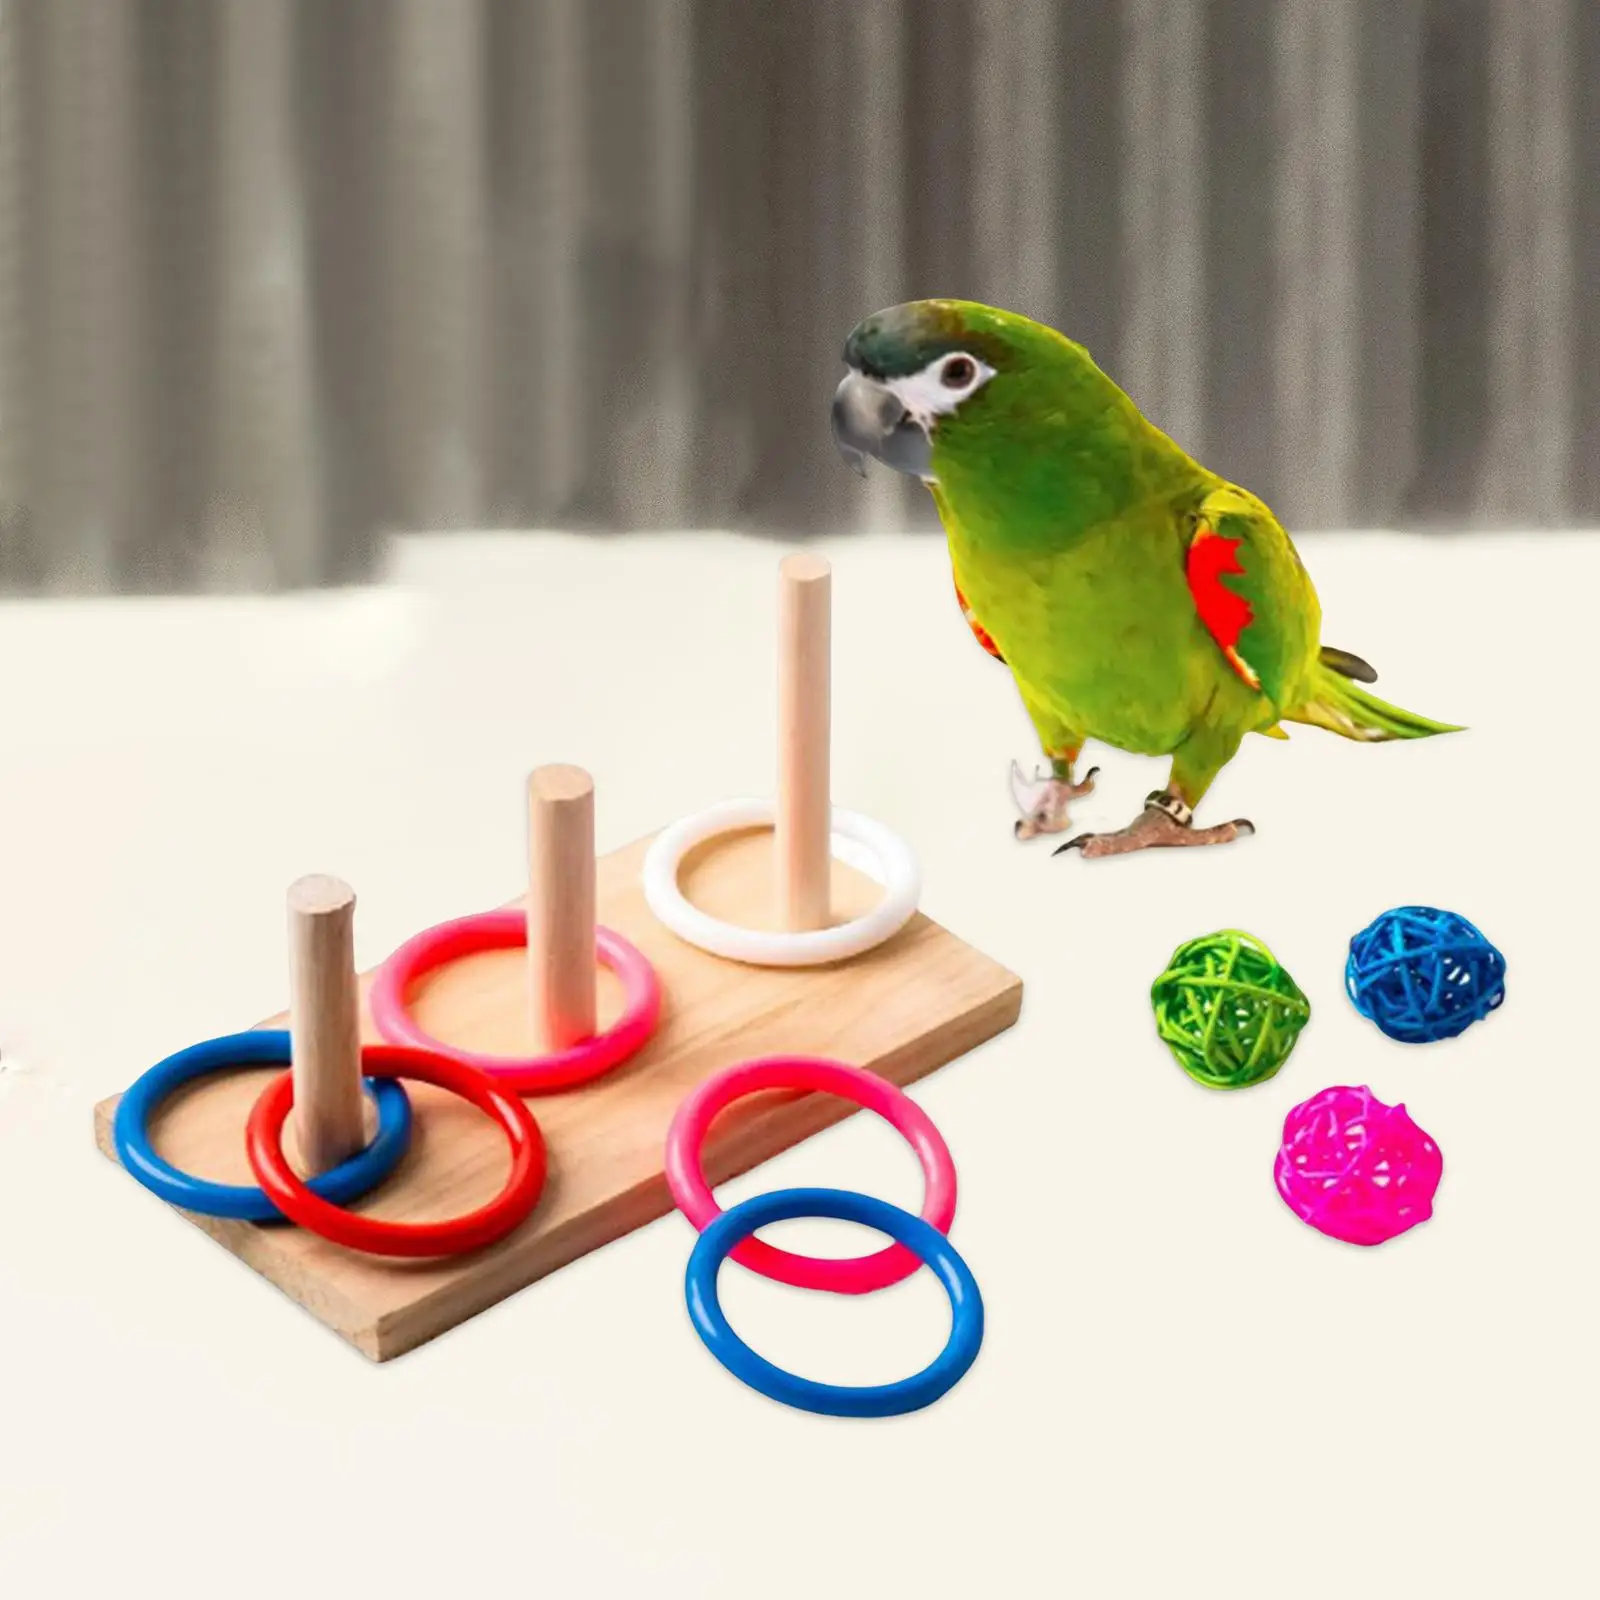 Funny Parrot Bird Ring Toy Parrot Birds Toys Educational Trick Prop for Cockatoos Macaws Parakeets Lovebird Birds Gift